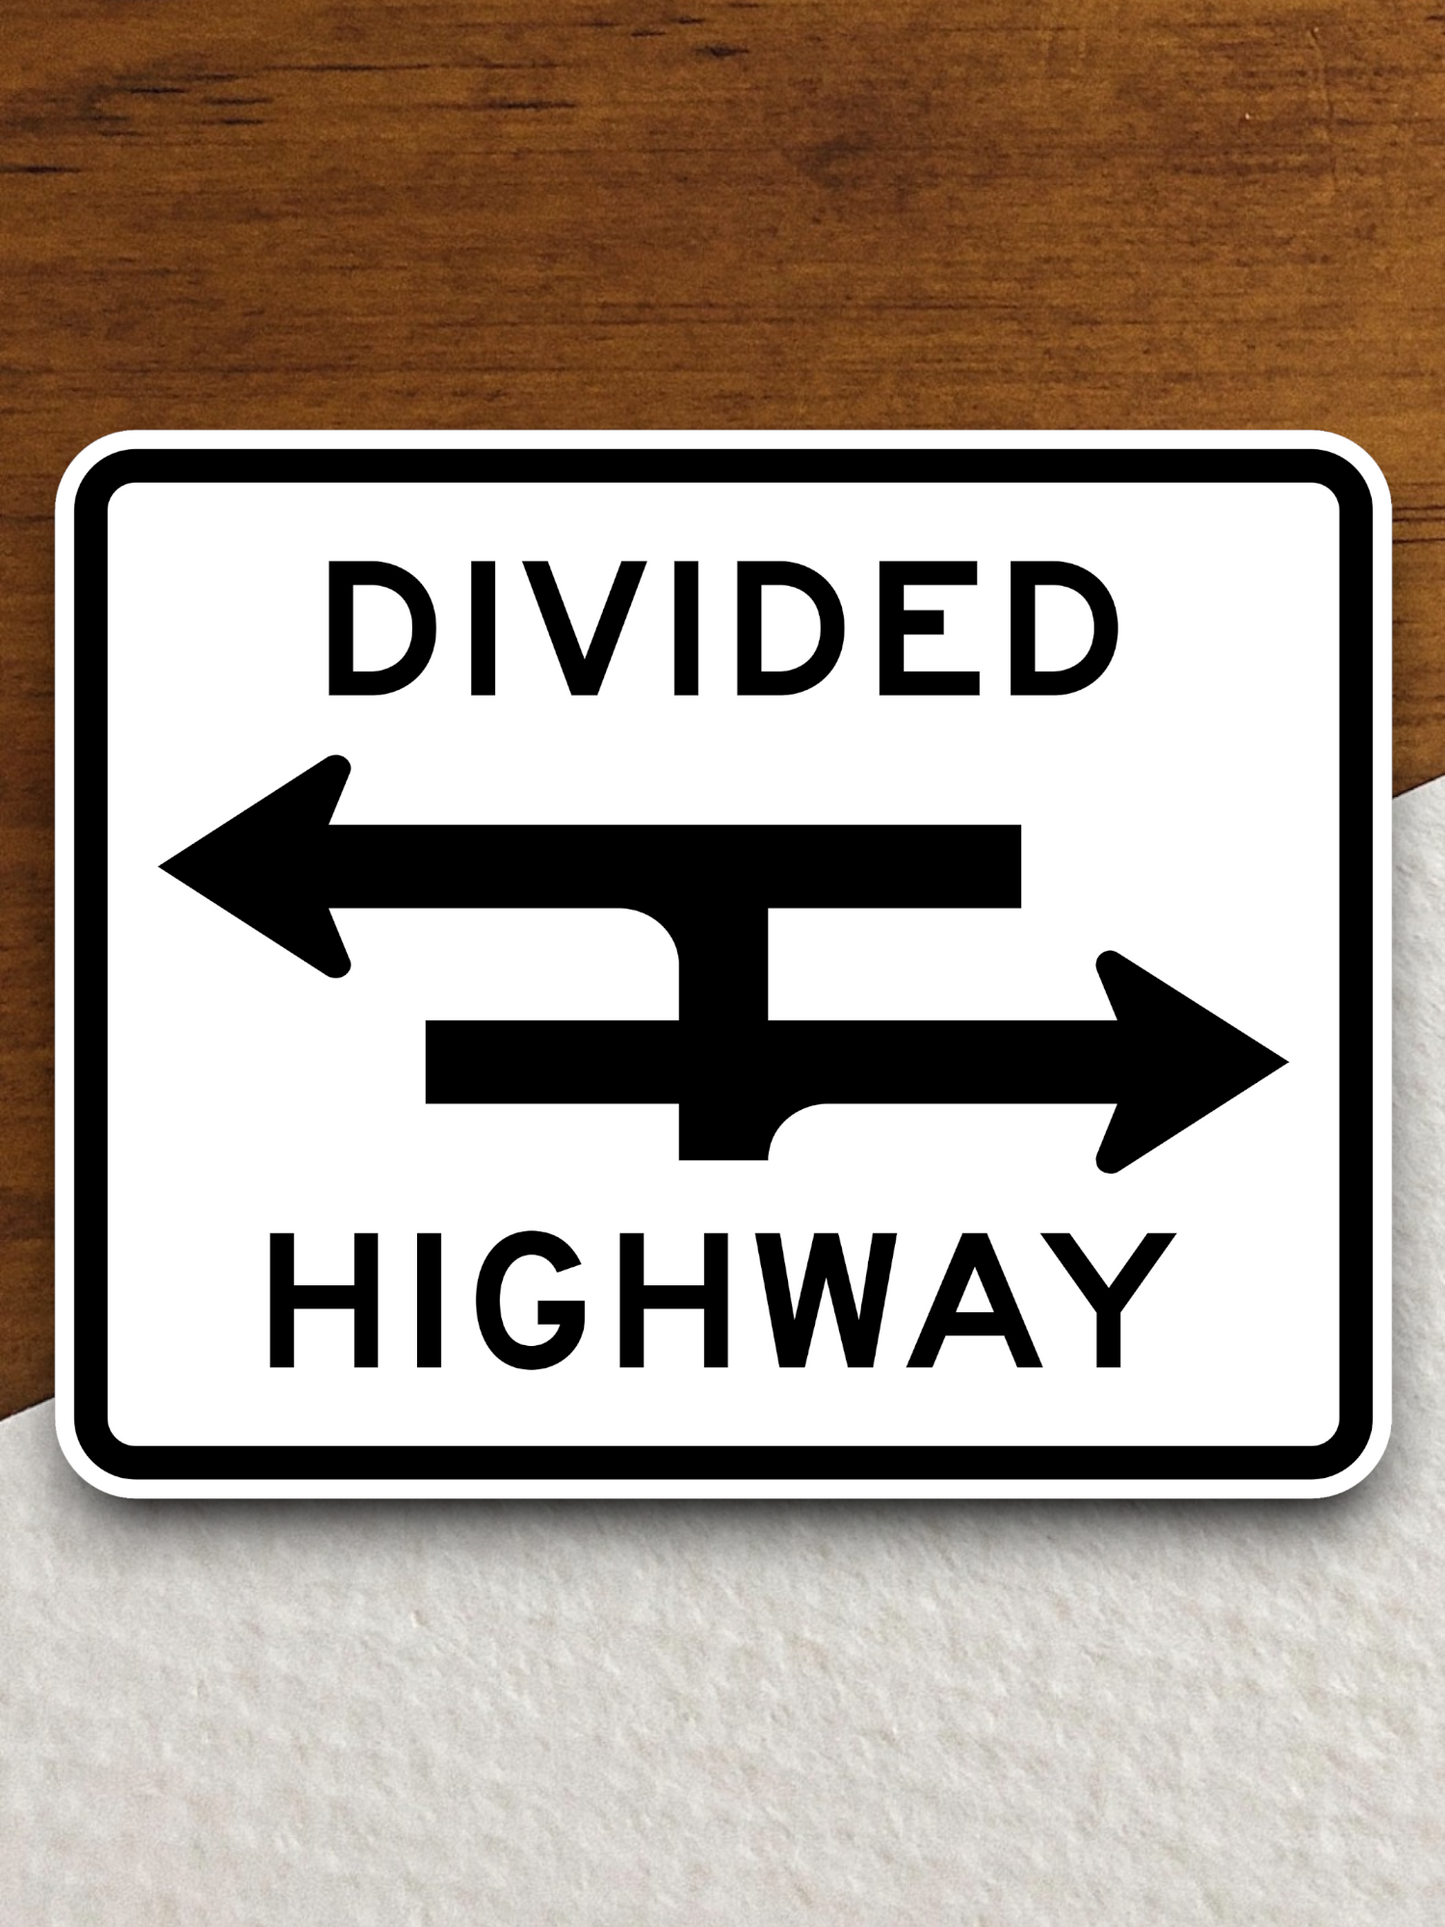 Divided highway crossing T-intersection United States Road Sign Sticker